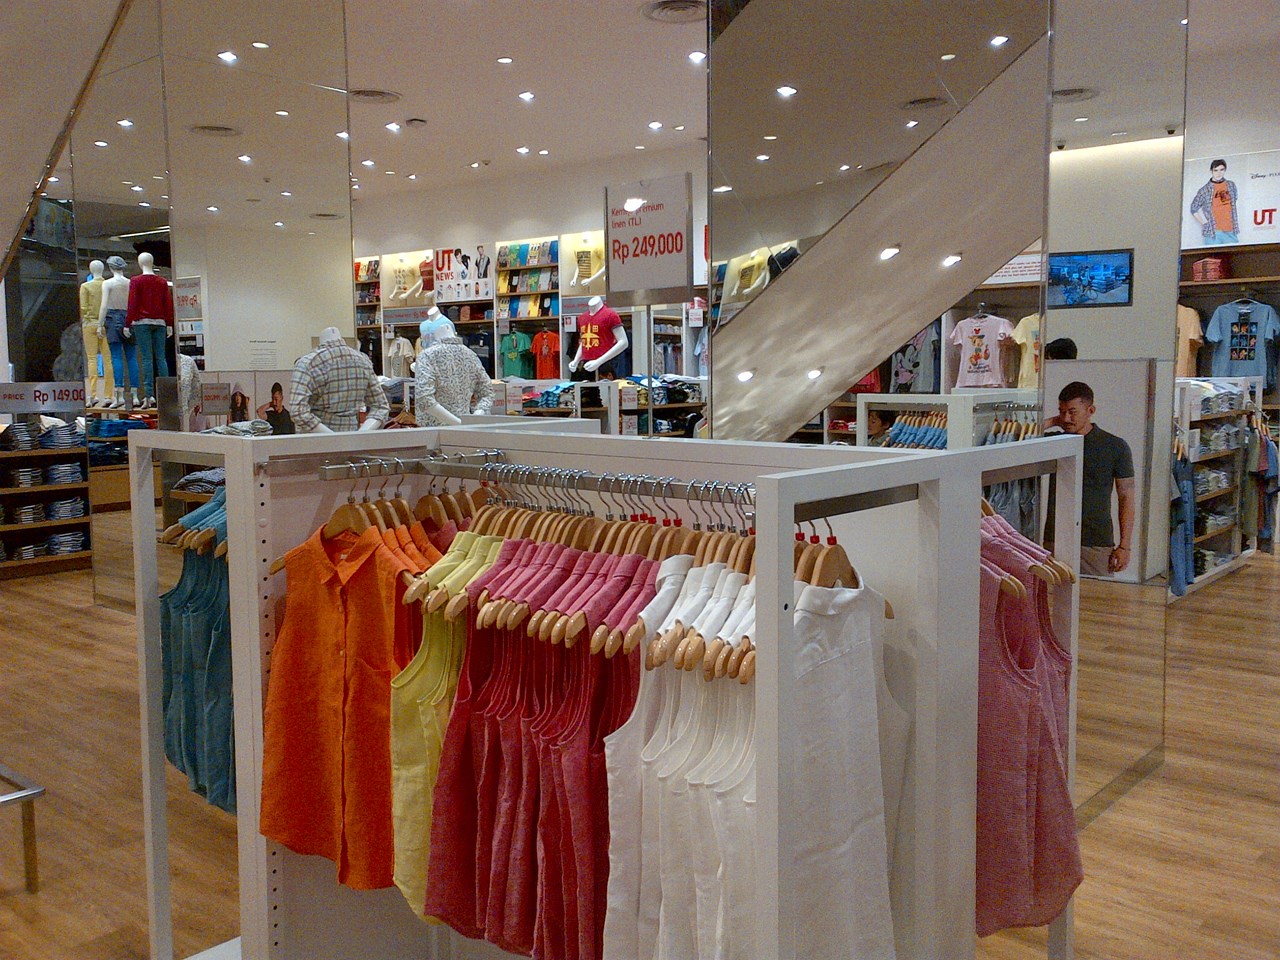 http://www.shintoko.jp/engblog/archives/images/2013/06/130625_uniqloopen02645.jpg